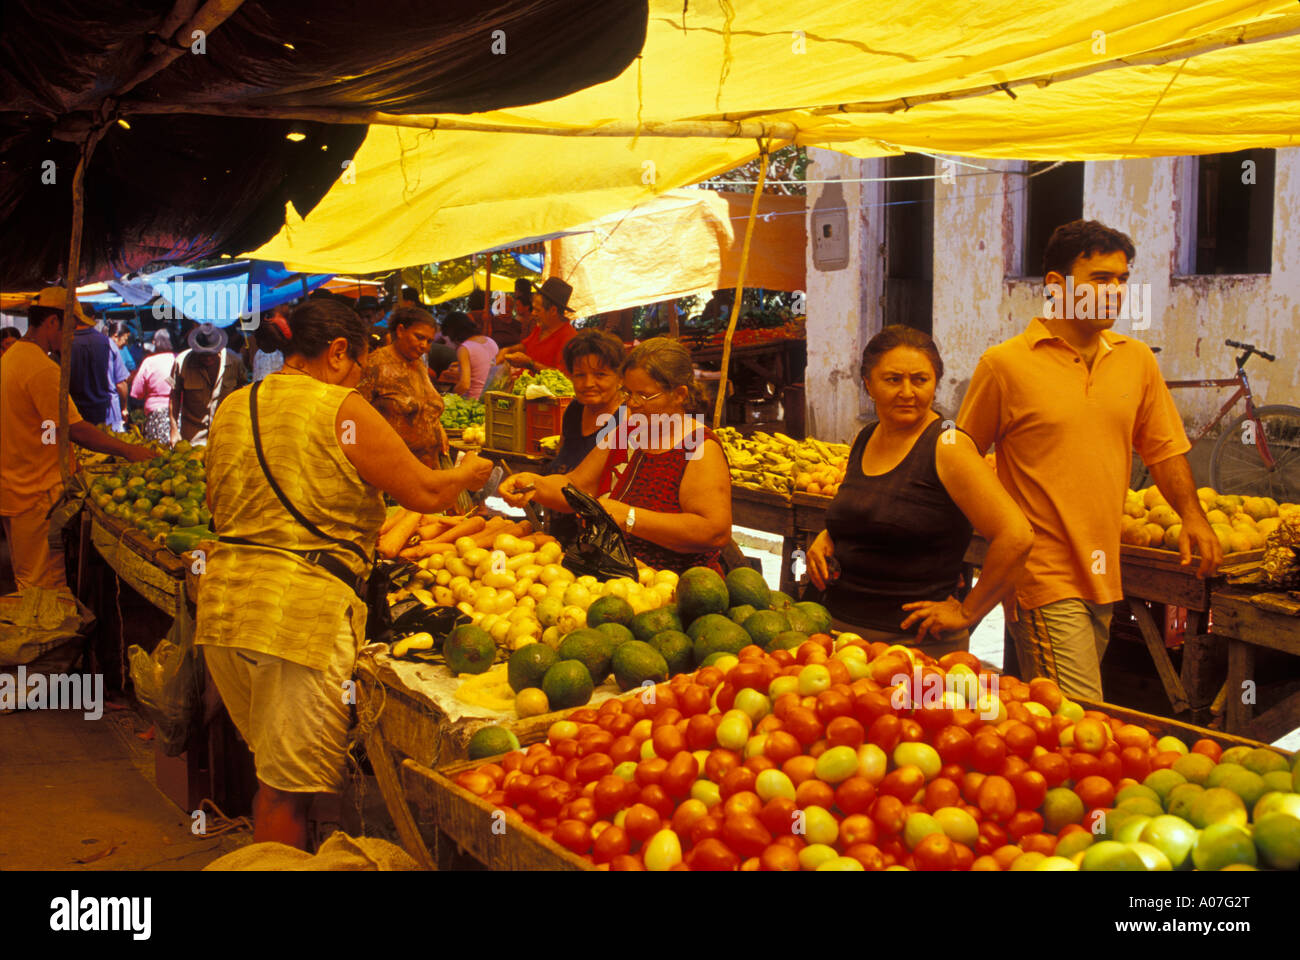 Street market, food for sale ( vegetables, fruits ) - popular commerce for low income customers commonly found at small cities of northeastern Brazil. Stock Photo